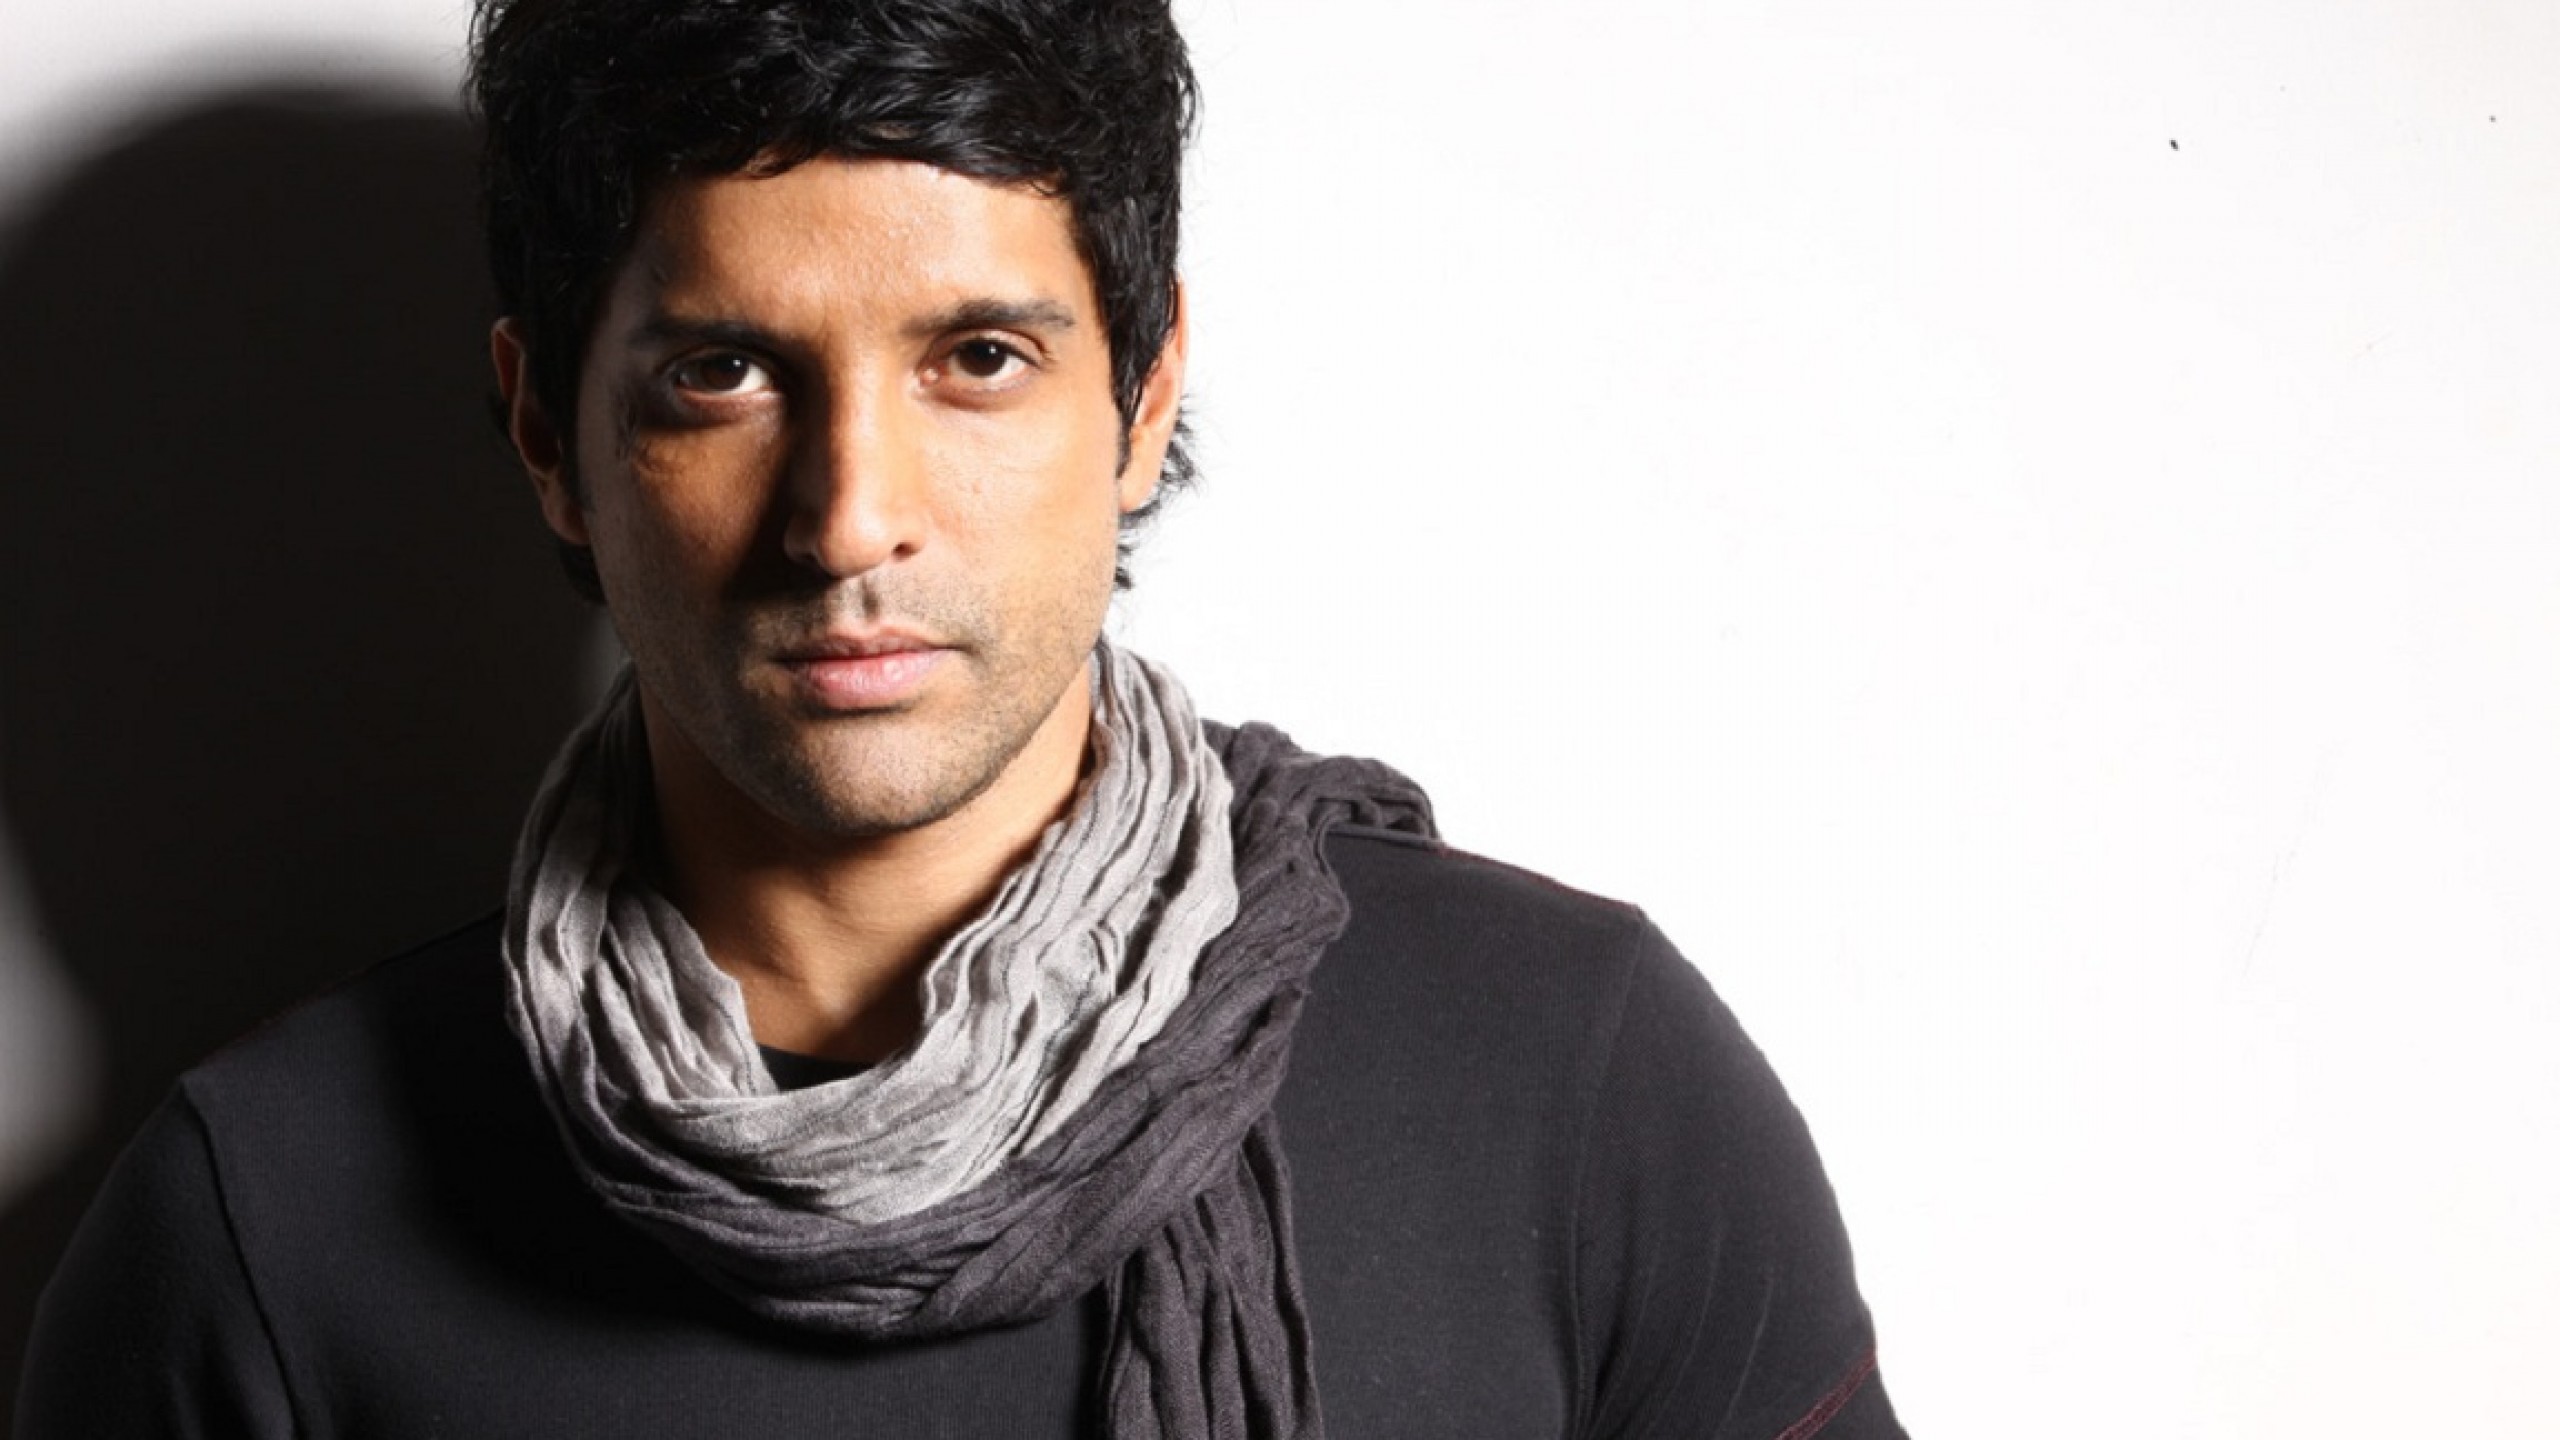 Â  Â Â In which if these songs Farhan Akhtar played the role of a lead singer?Â 